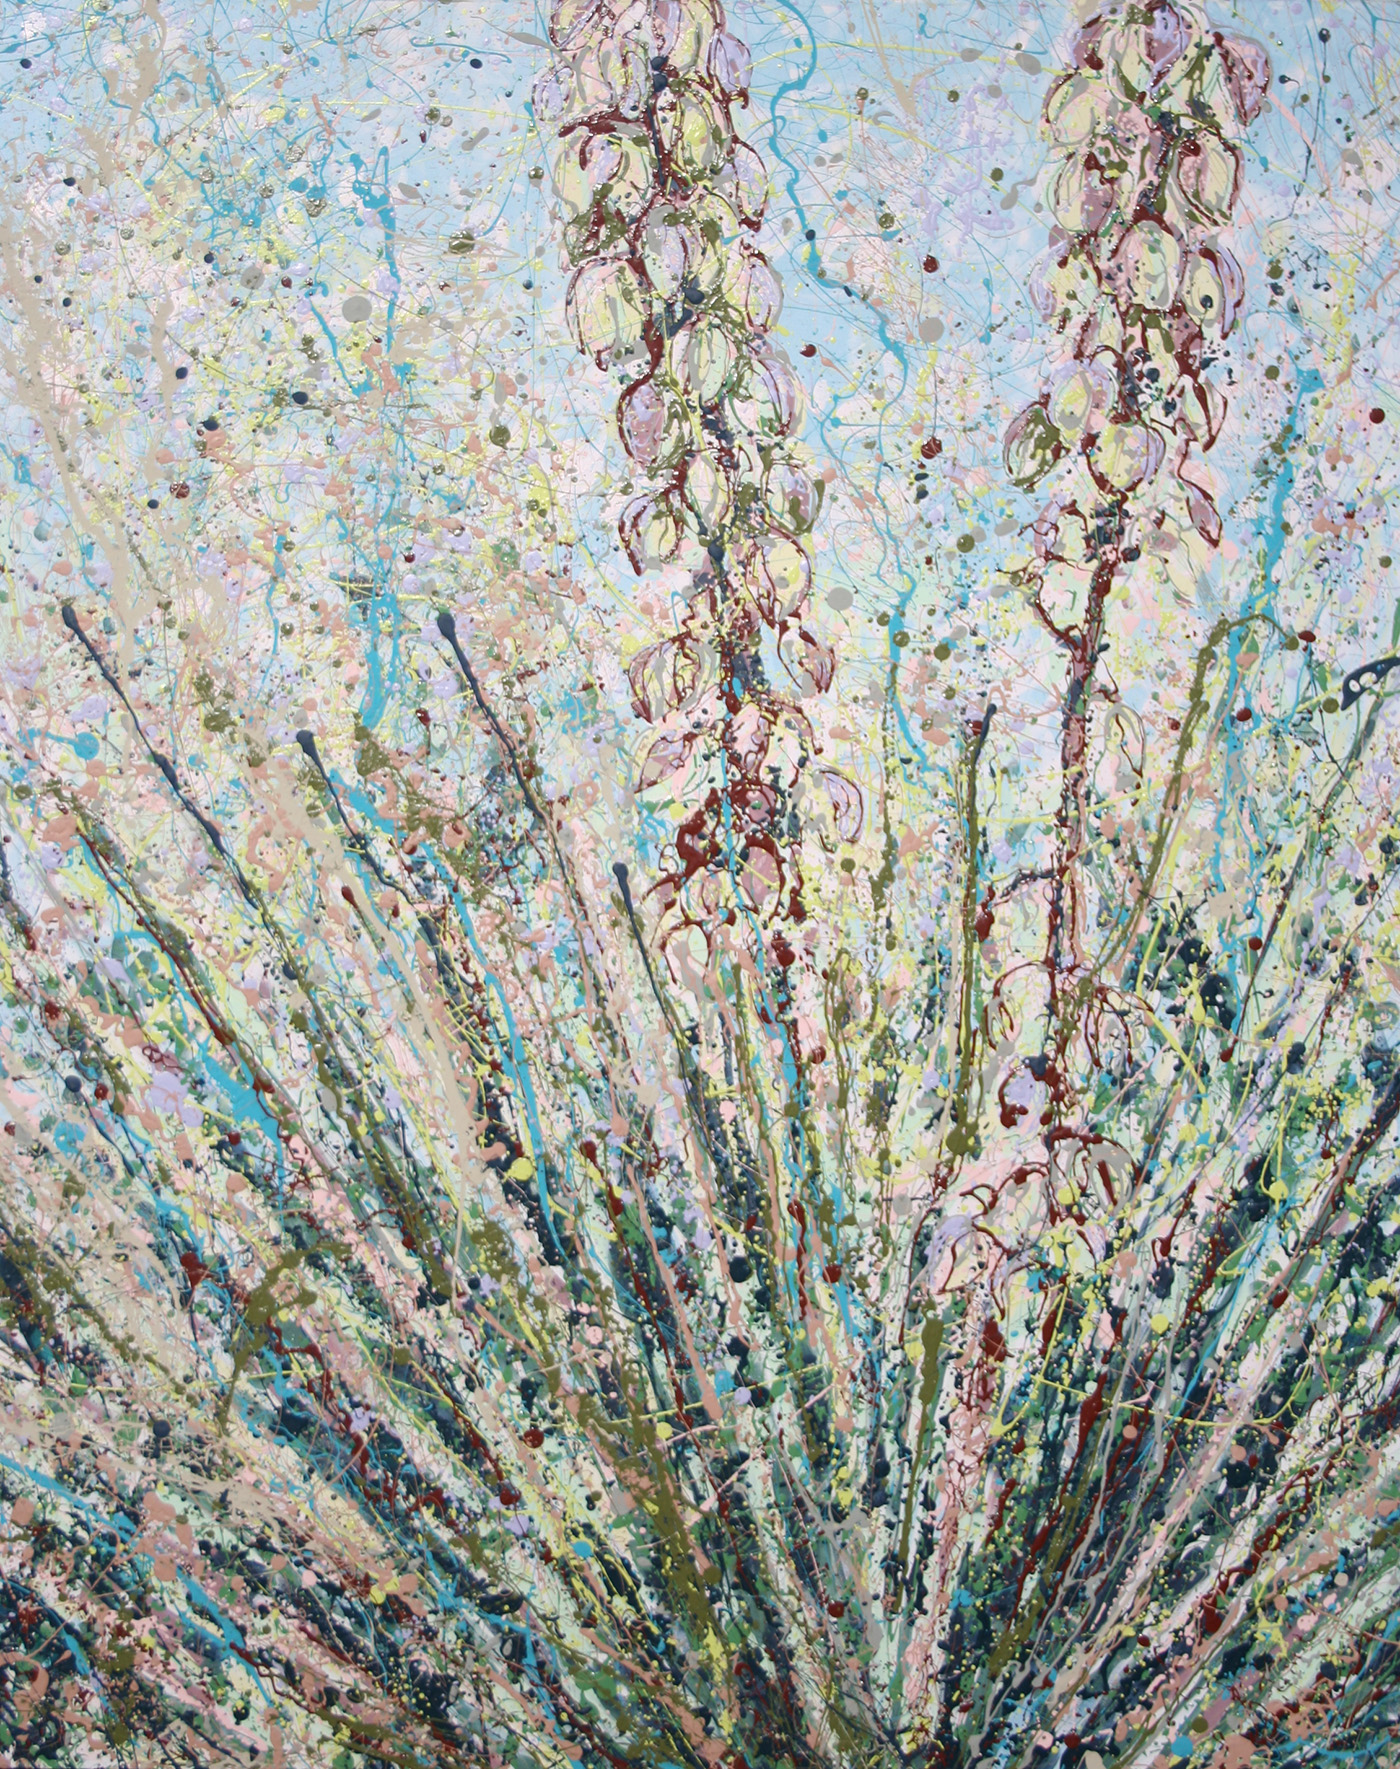 Yucca Bloom Latex Enamel Painting on Gallery Wrapped Canvas by Fort Collins, Colorado Artist Lisa Cameron Russell